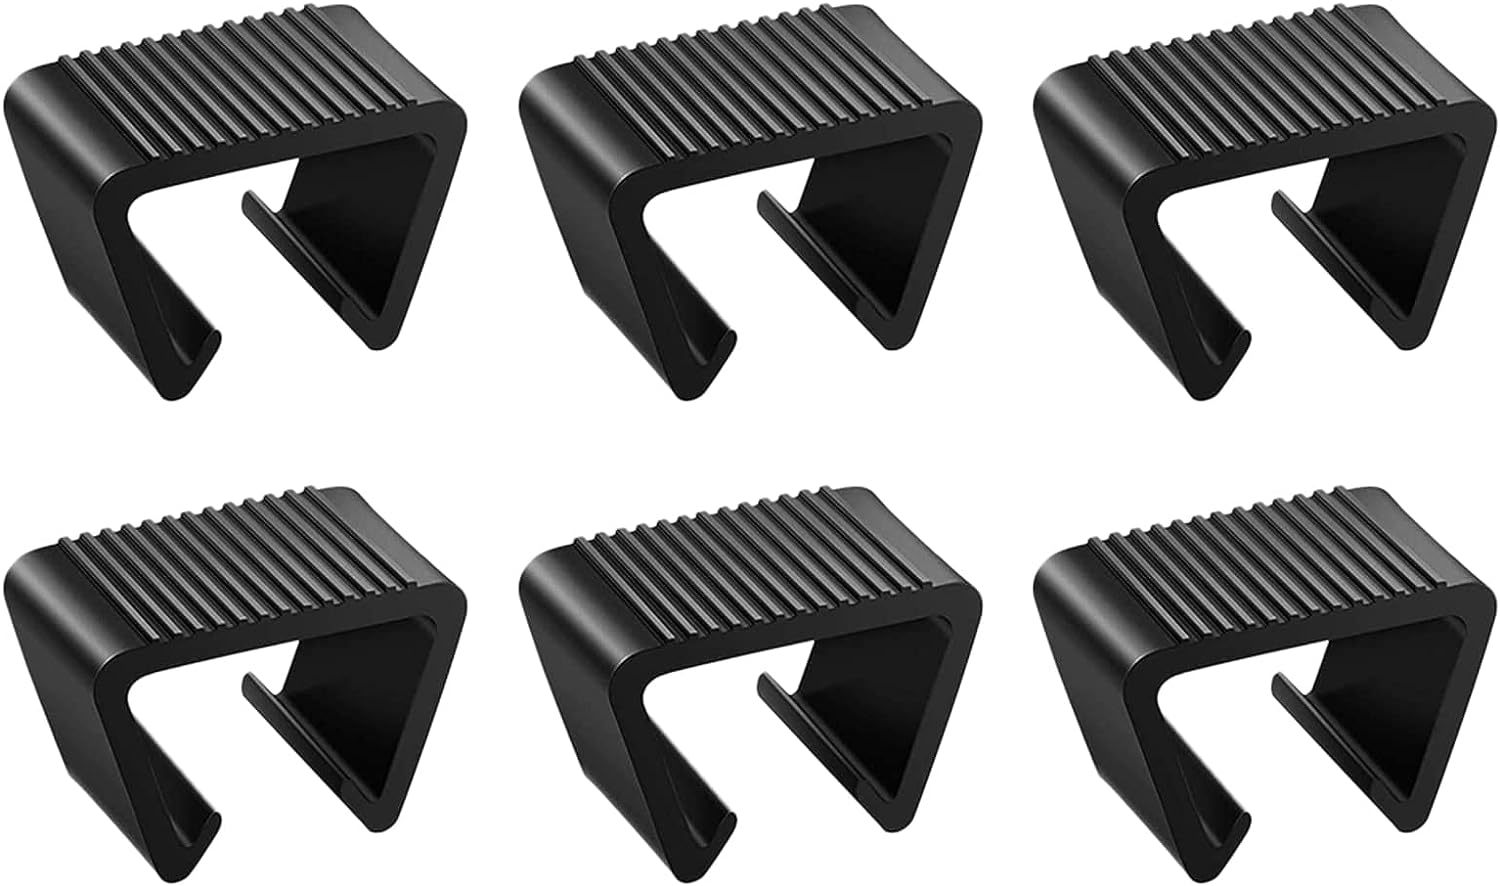 Primary image for Eagles 6 Pc\. Patio Furniture Clips, Large, Anti-Slip Stripe, Strong Connectors